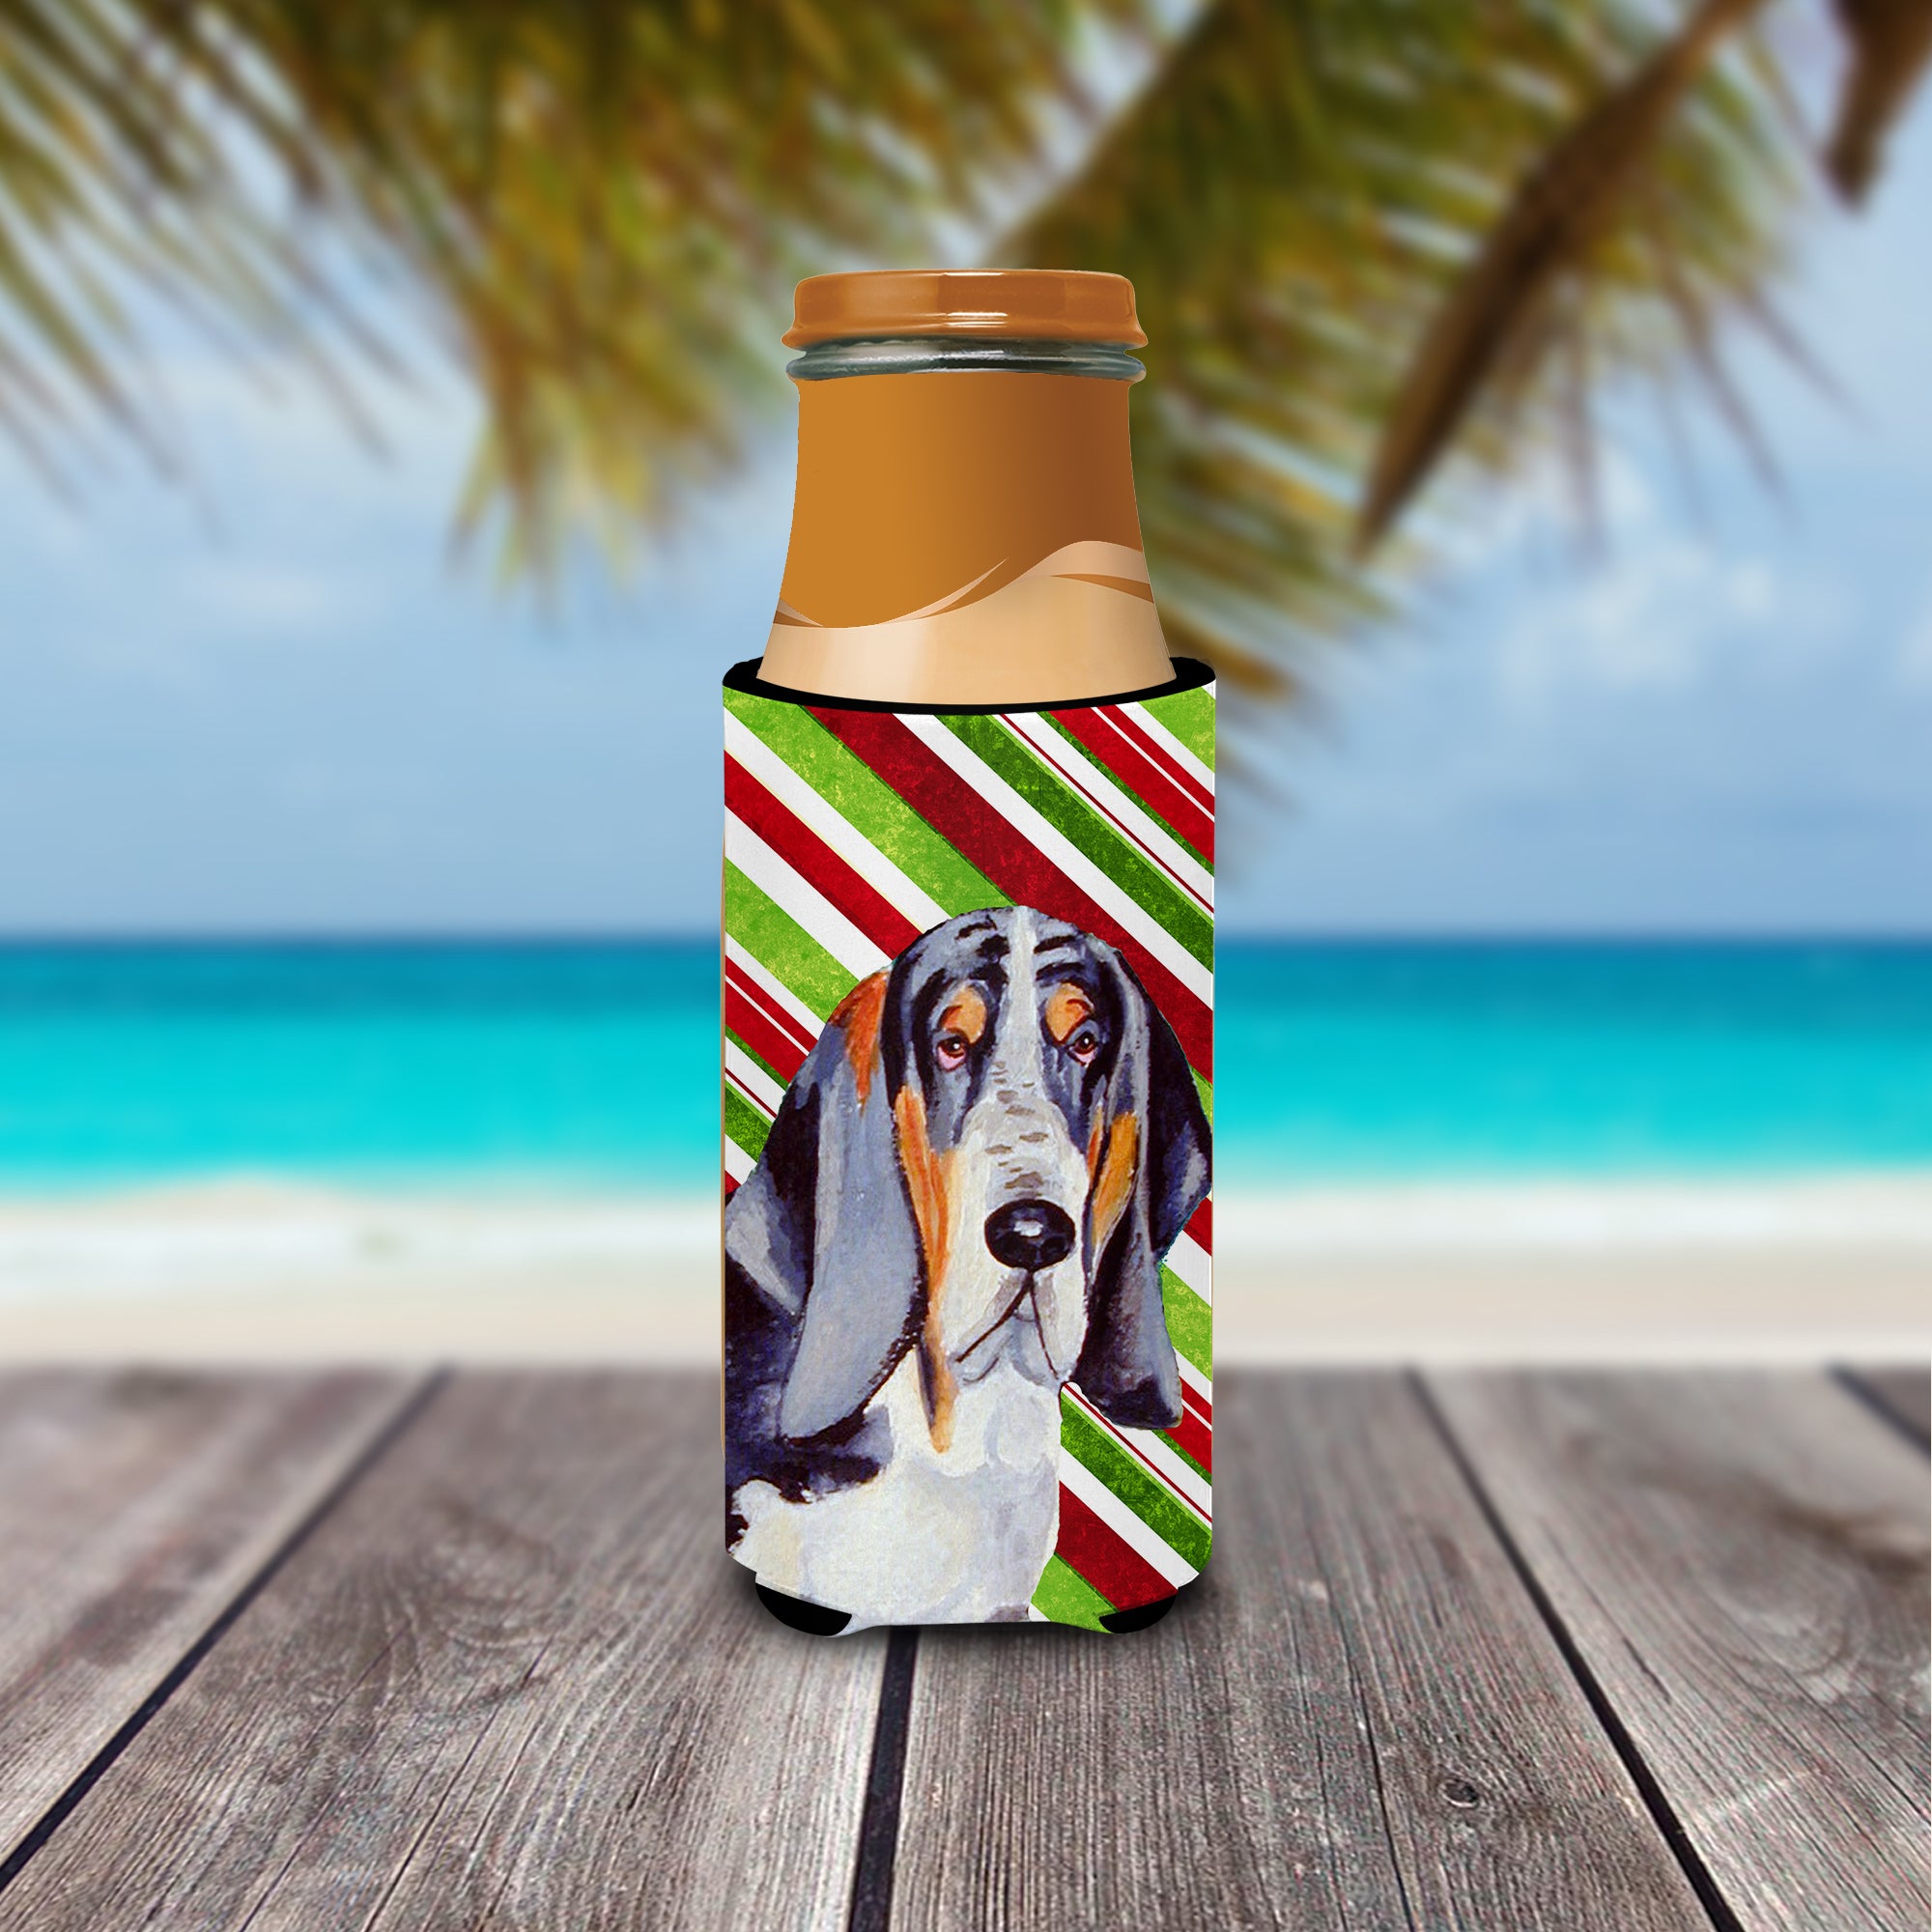 Basset Hound Candy Cane Holiday Christmas Ultra Beverage Insulators for slim cans LH9237MUK.